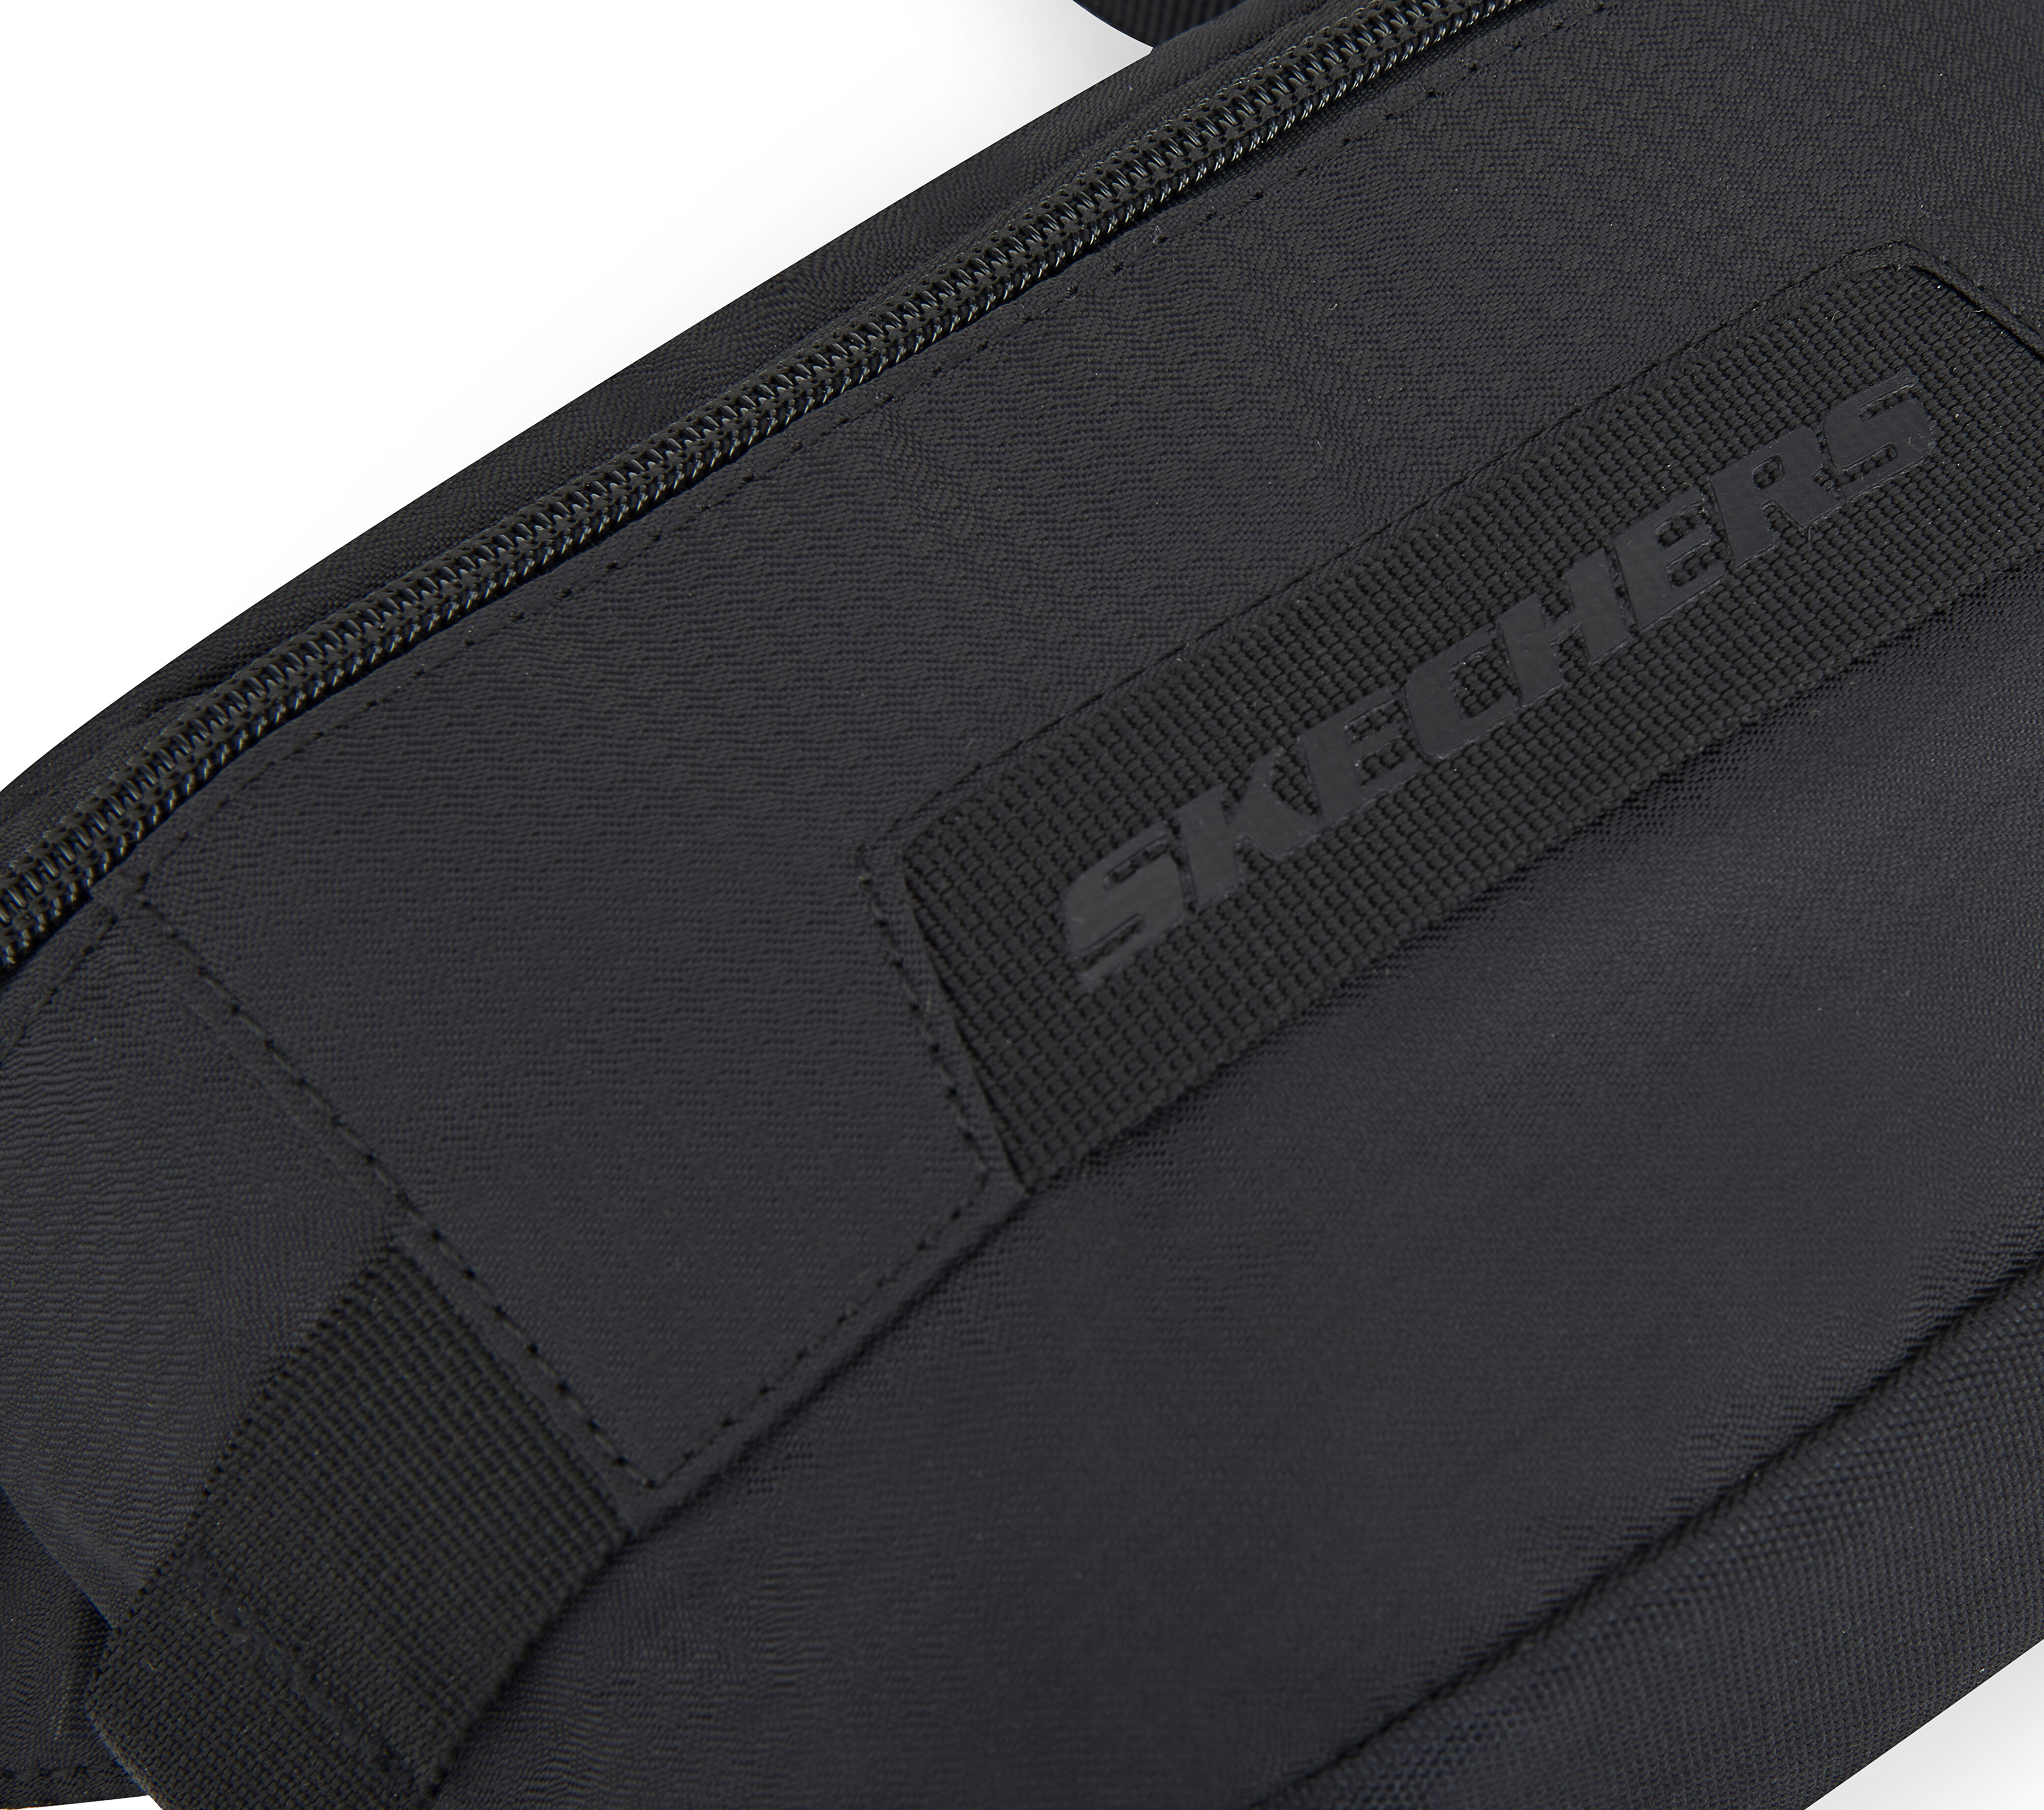 Skechers Functional Fanny Ppack for Men  Woman Sport Fitness Waist Belt  Bag Gym Chest Bag for Running Hiking or Daisy Use Black  Amazoncomau  Clothing Shoes  Accessories